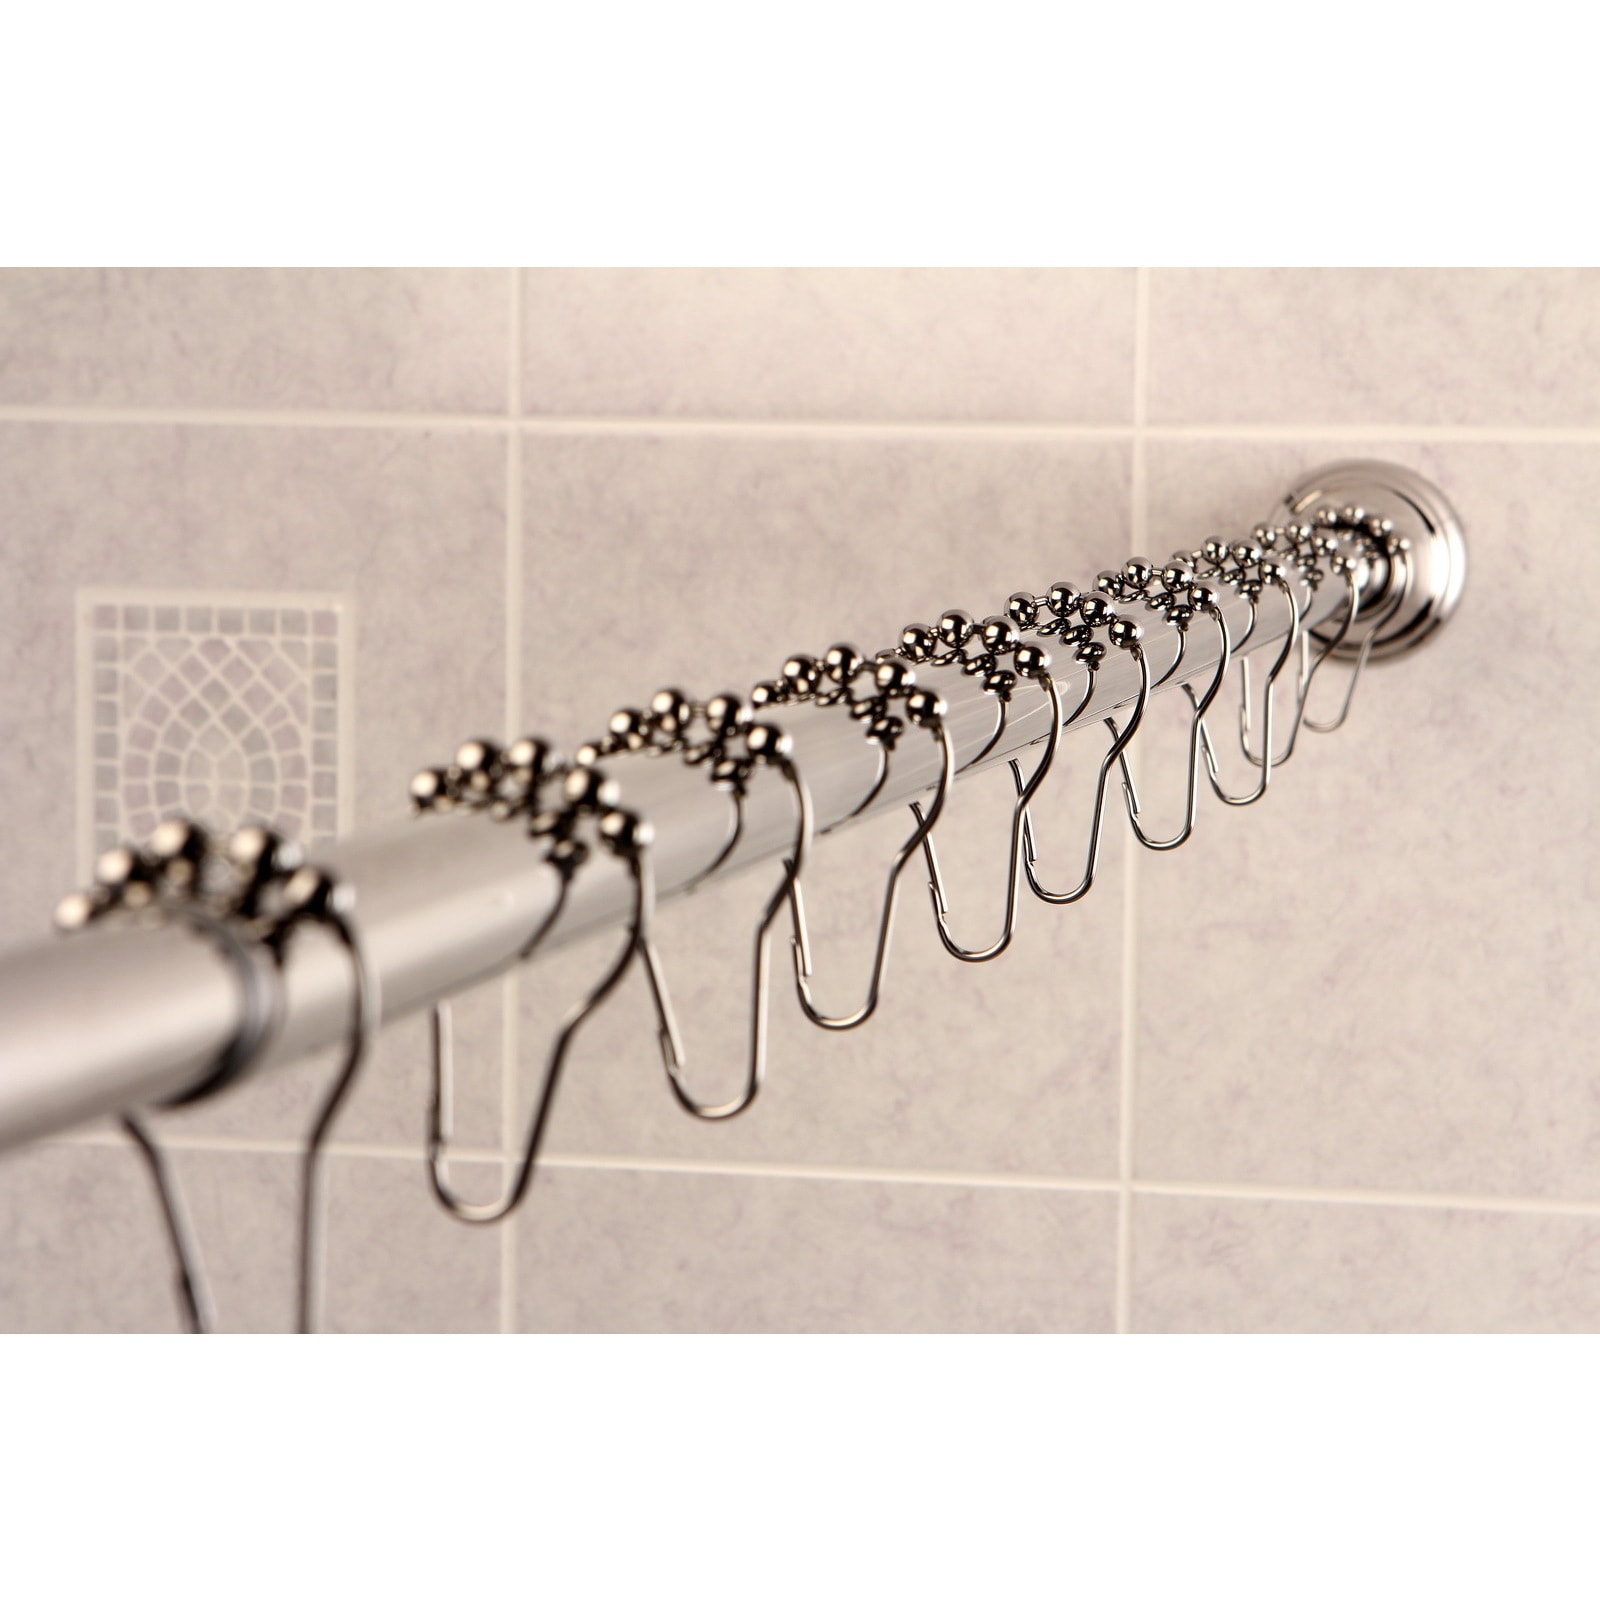 Kingston Brass Ksr111 Edenscape Polished Chrome Straight Shower Curtain Rod with Shower Curtain Rings